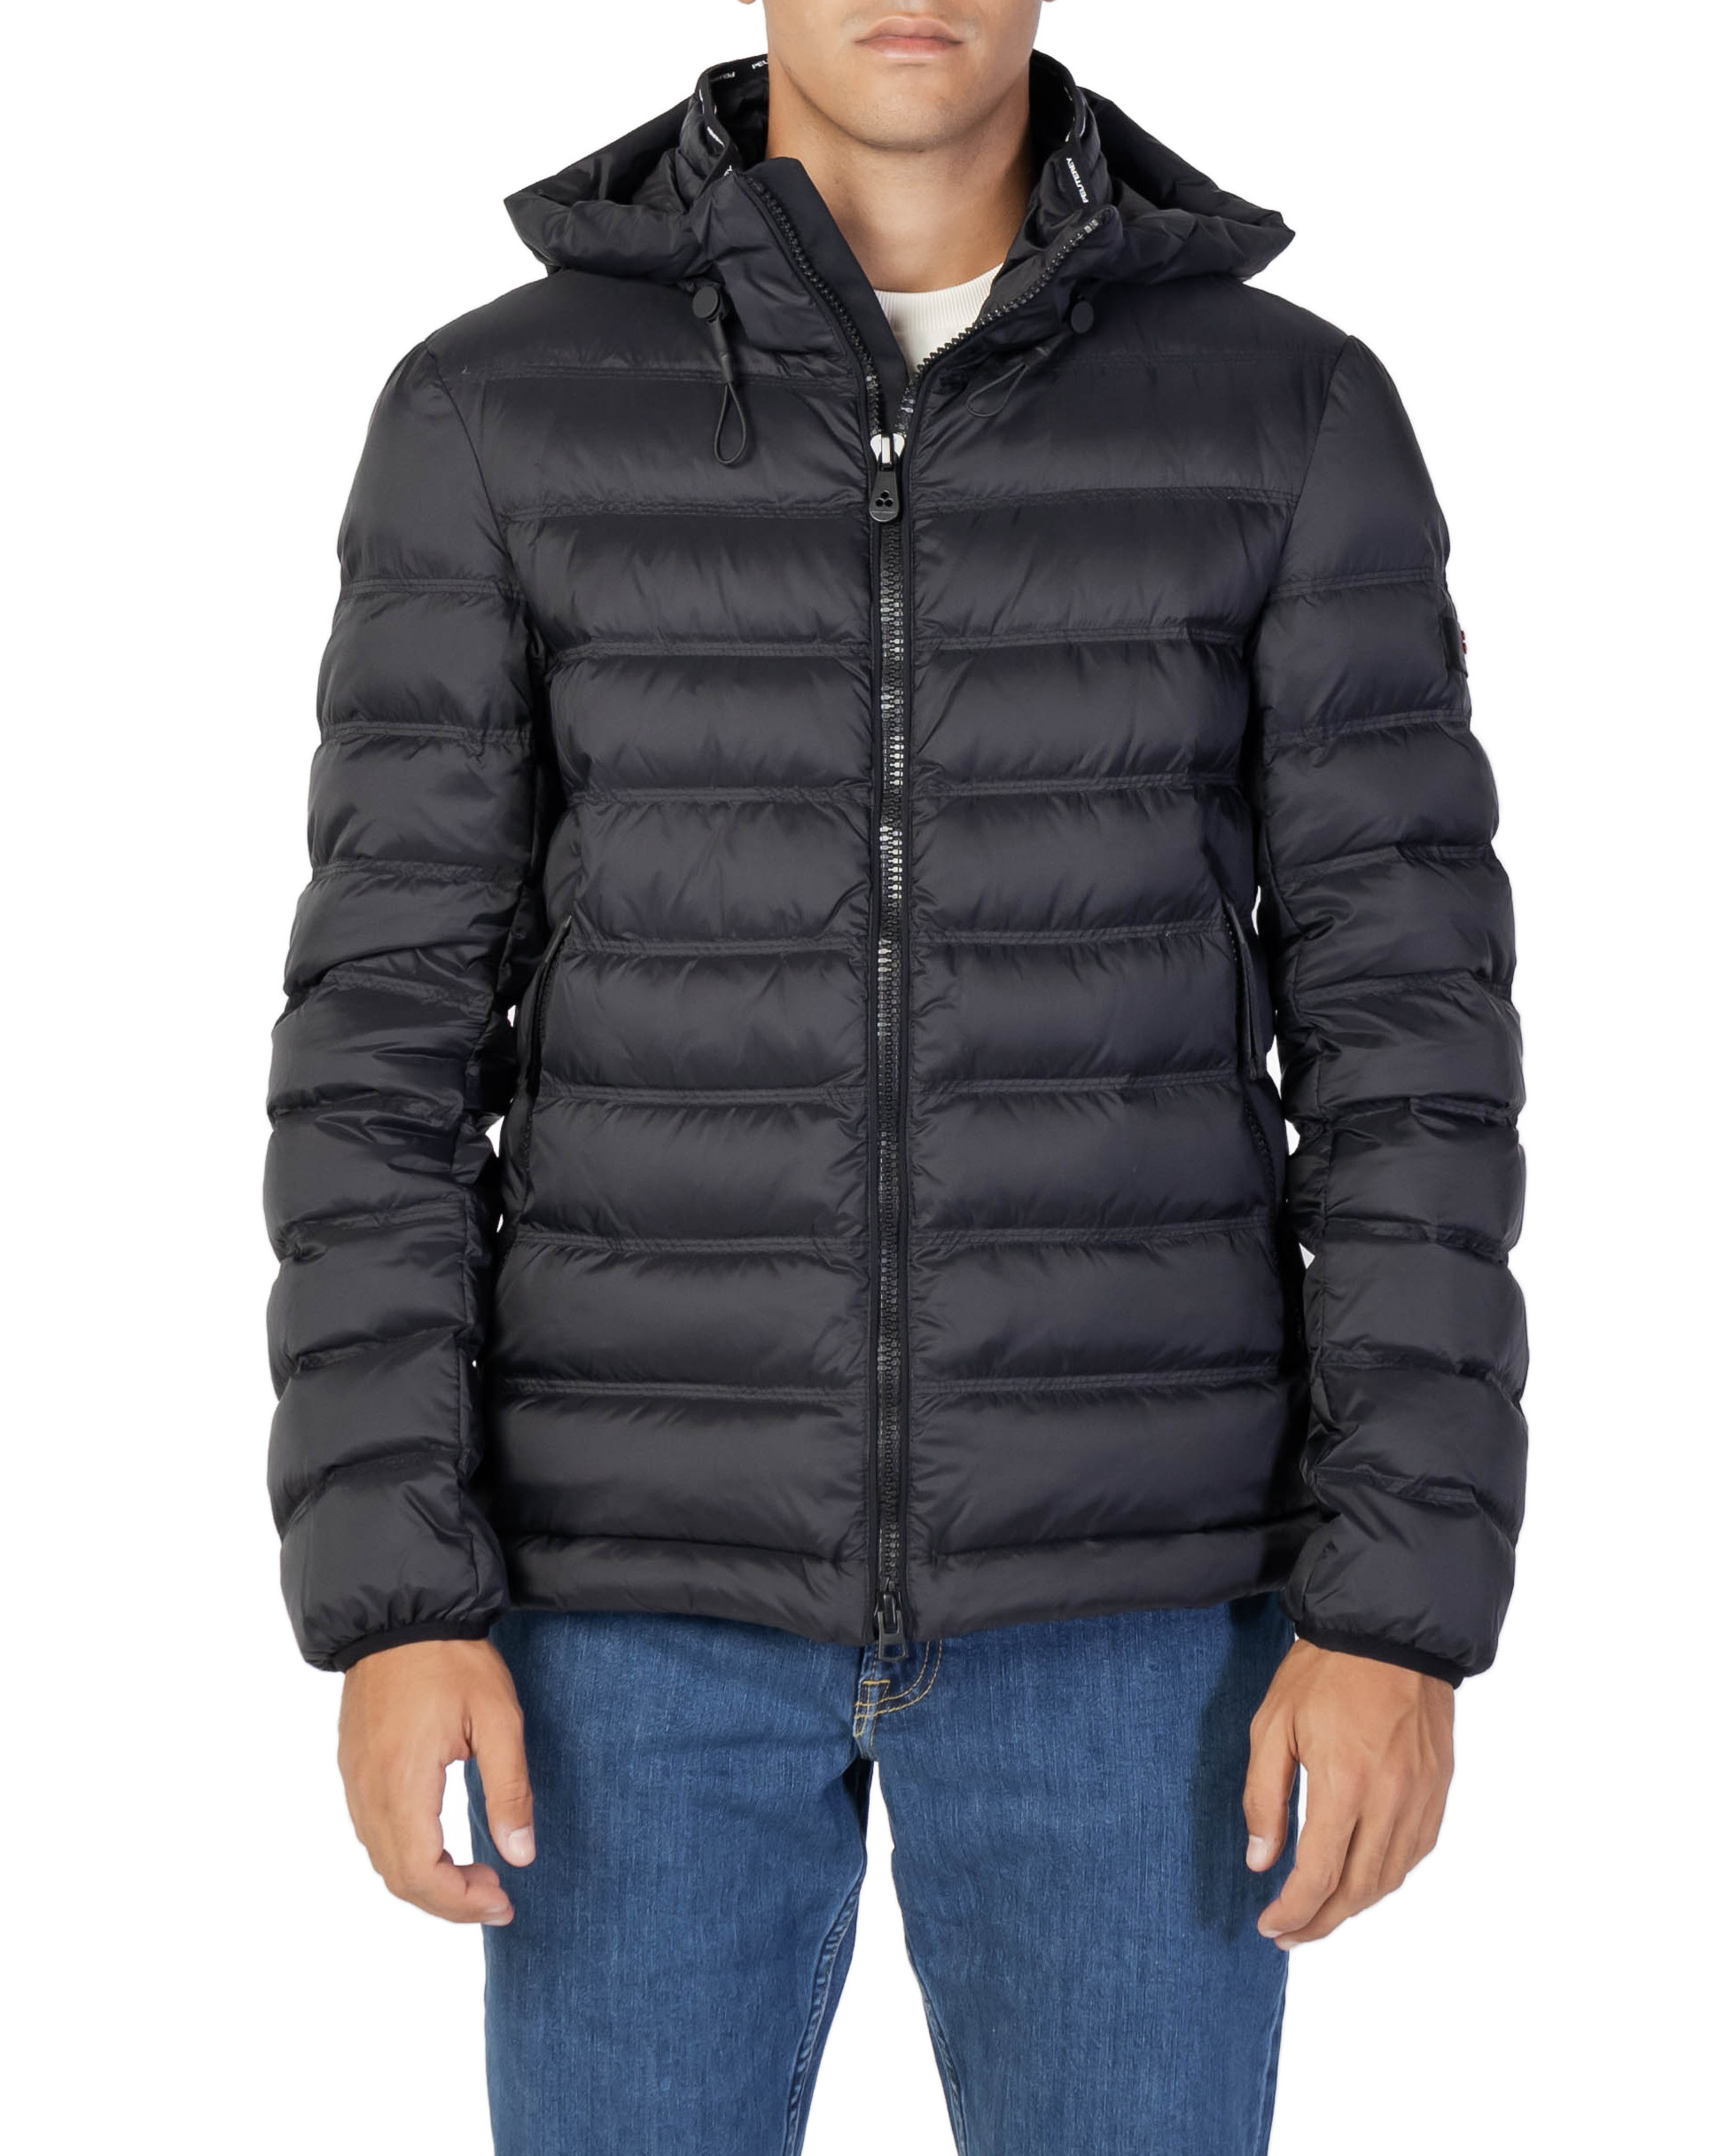 Nylon Hooded Jacket with Front Pockets